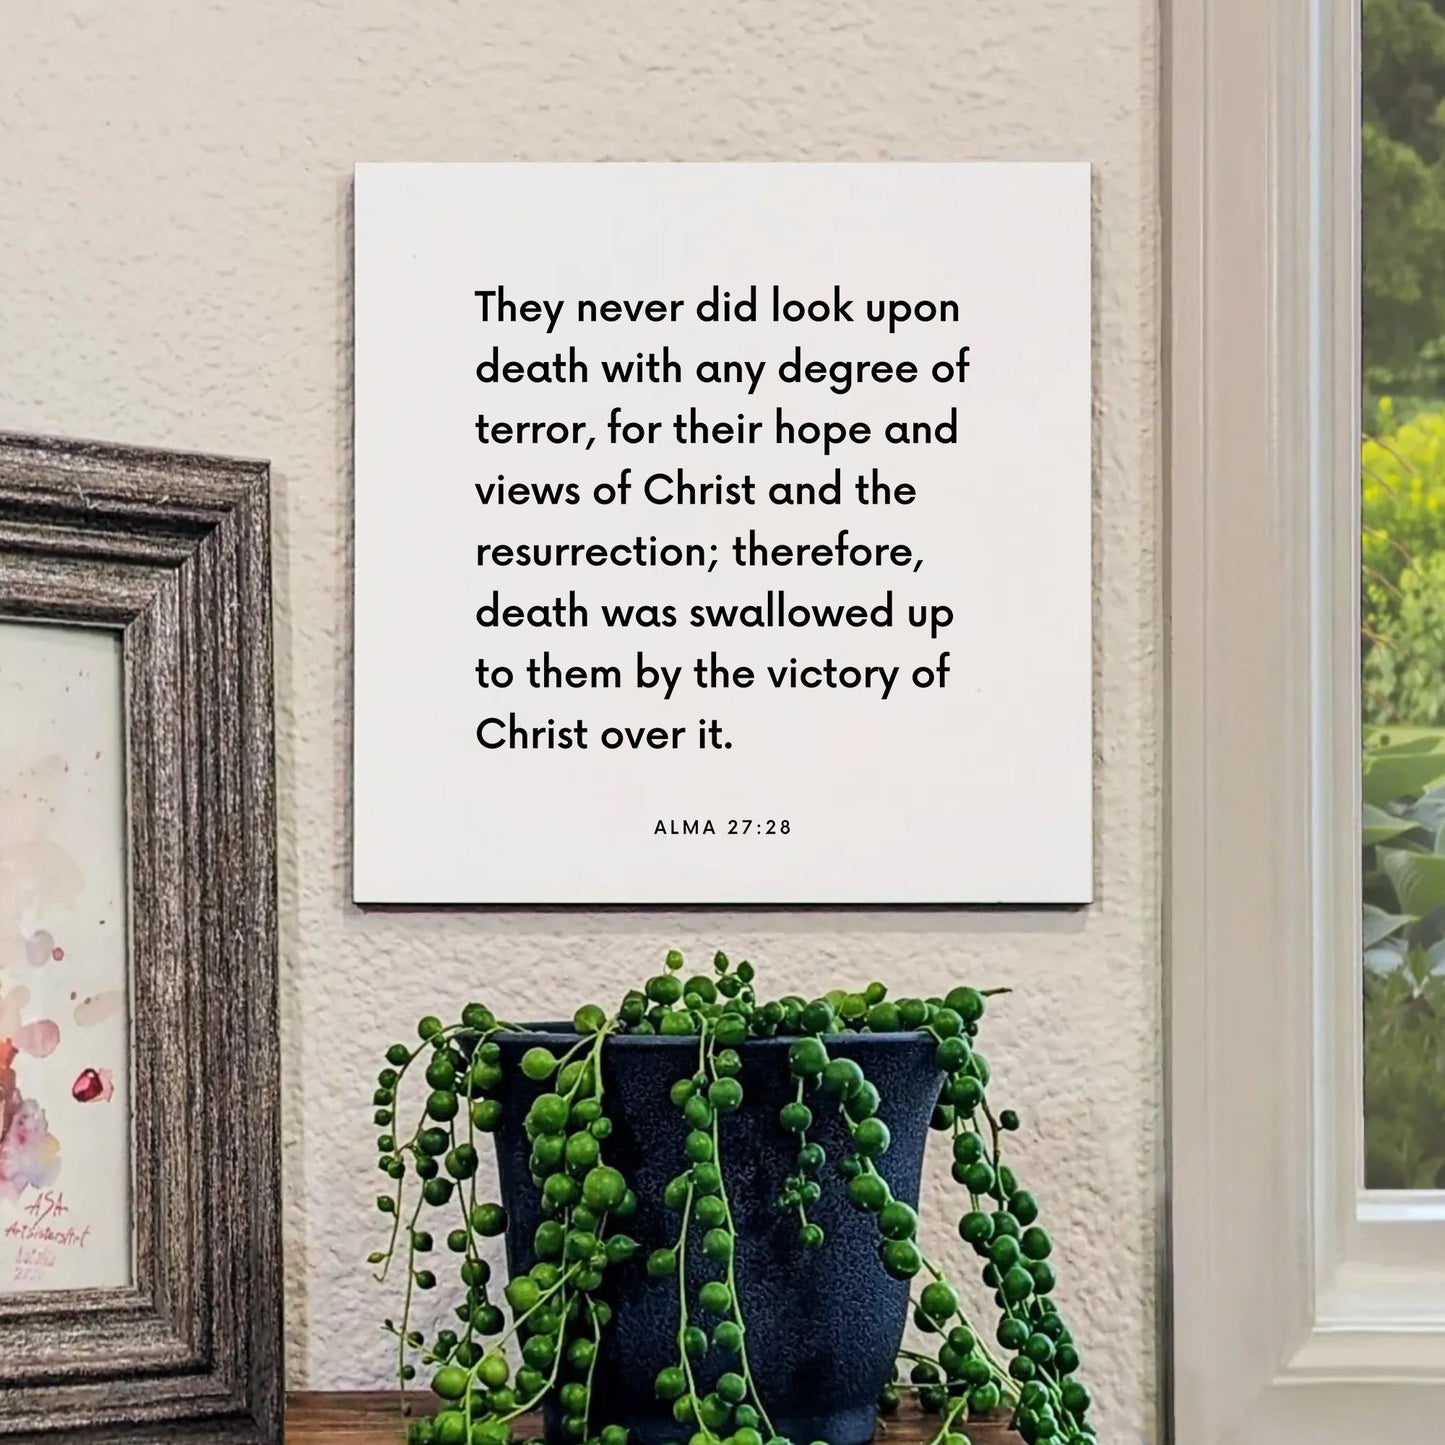 Window mouting of the scripture tile for Alma 27:28 - "They never did look upon death with any degree of terror"